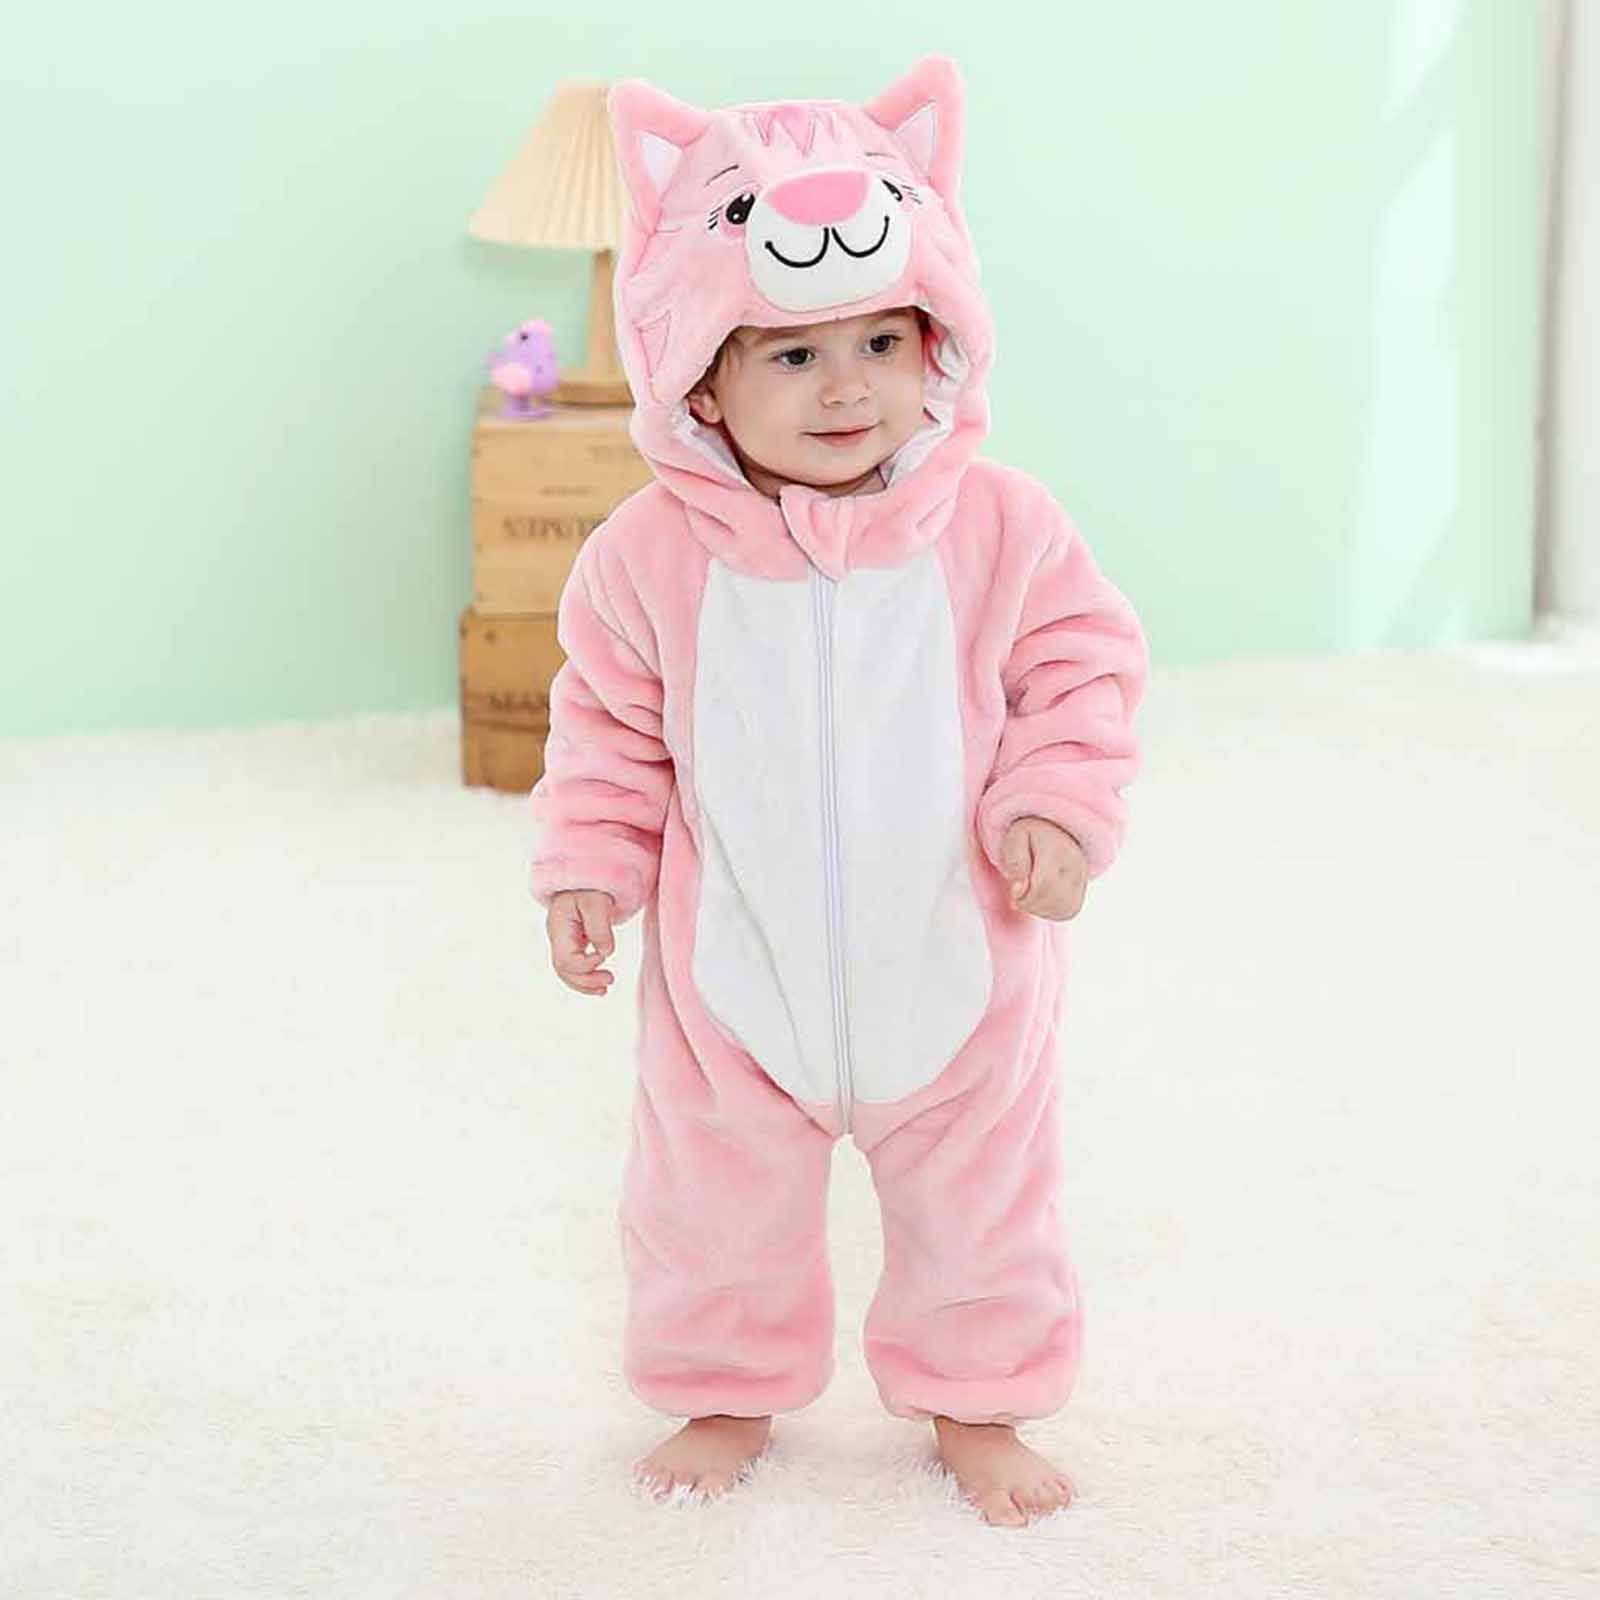 Clearance Sale Prime Juebong Autumn Winter Infant Toddler Baby Unisex Child  Pajama Plush Onesie One-piece Sloth Animal Costume,Green,0-6 Months